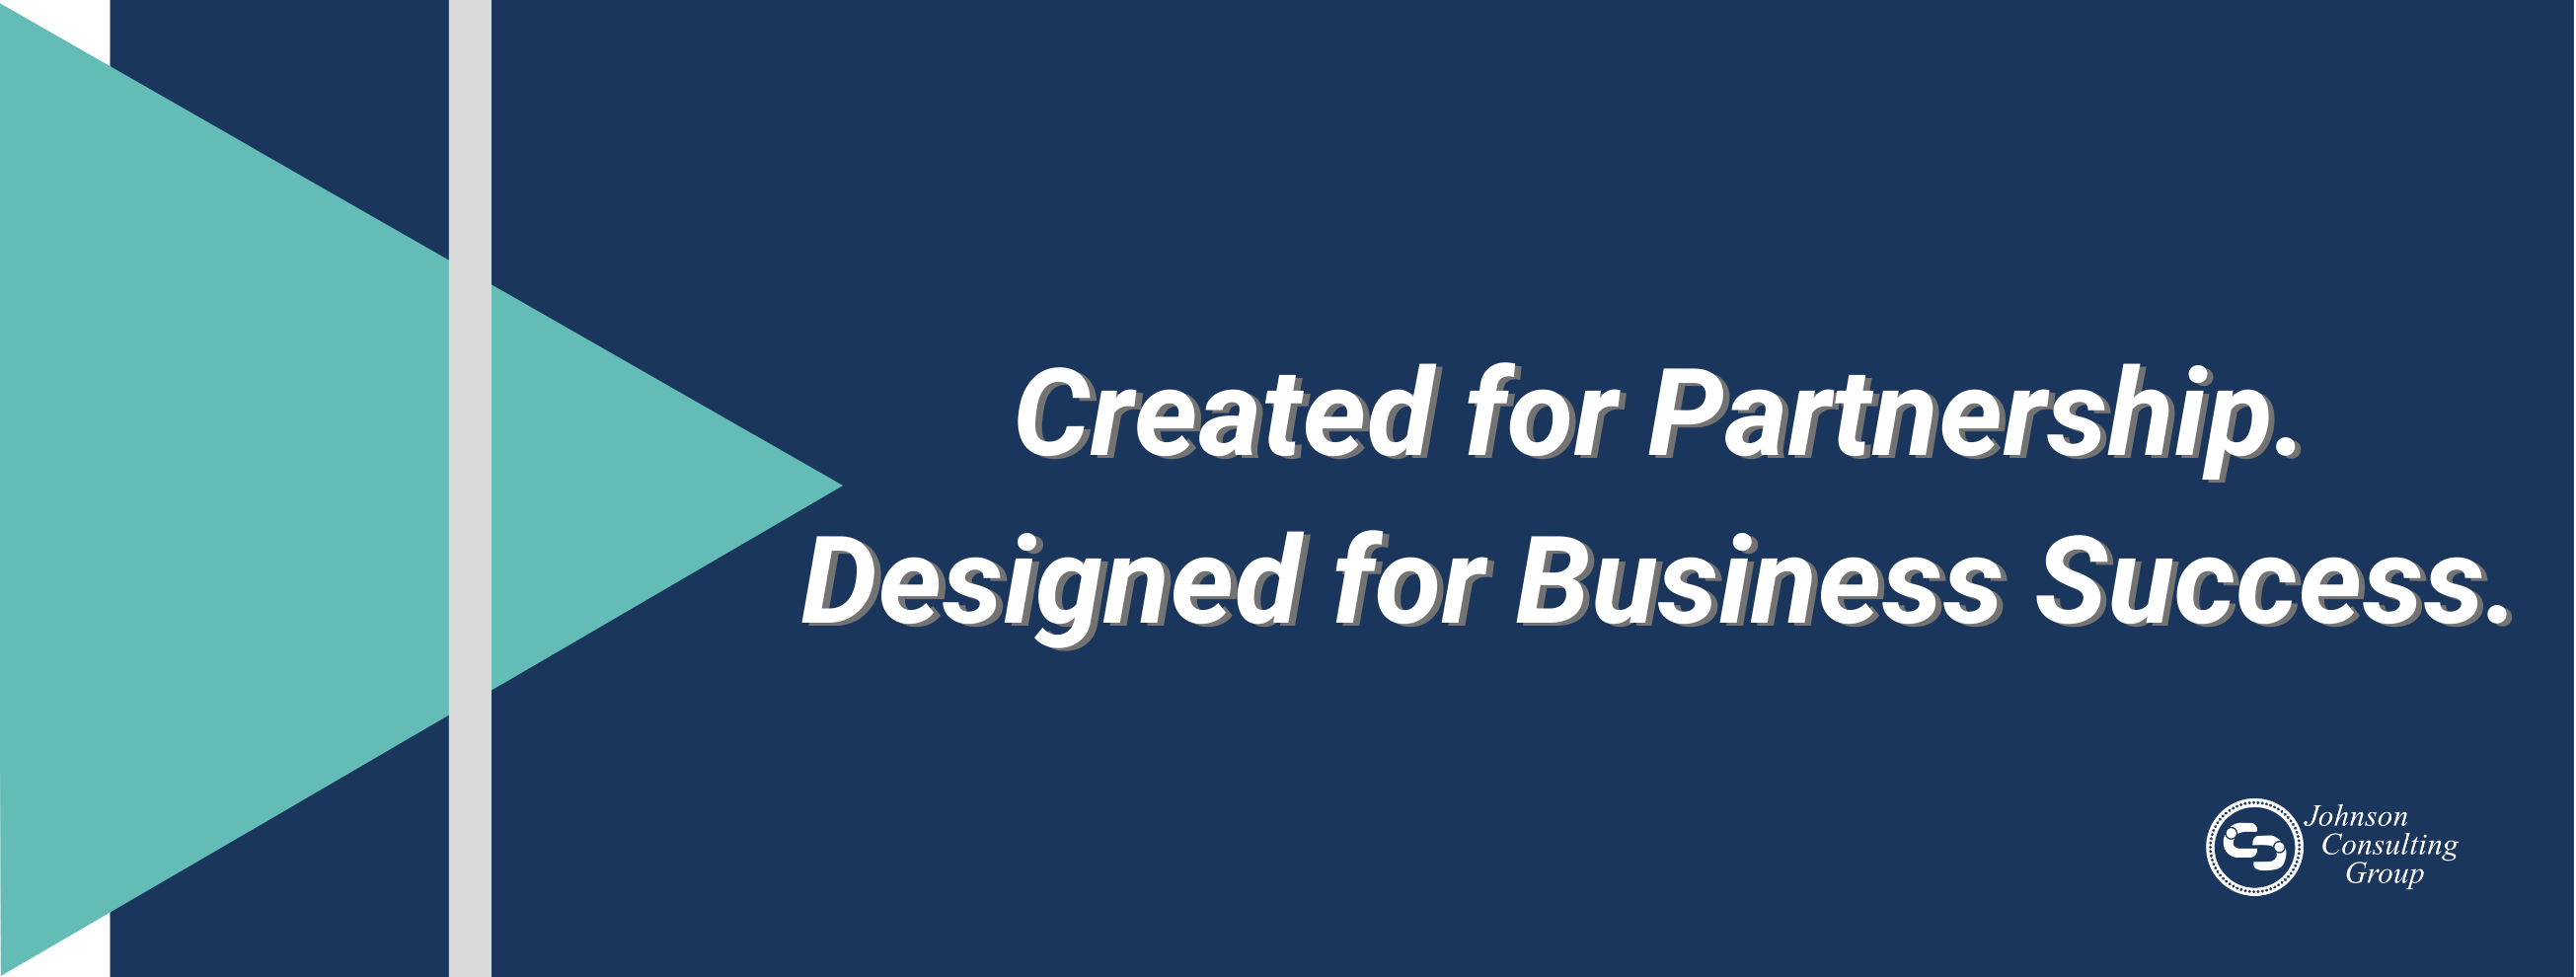 Created for Partnership. Designed for Business Success. 